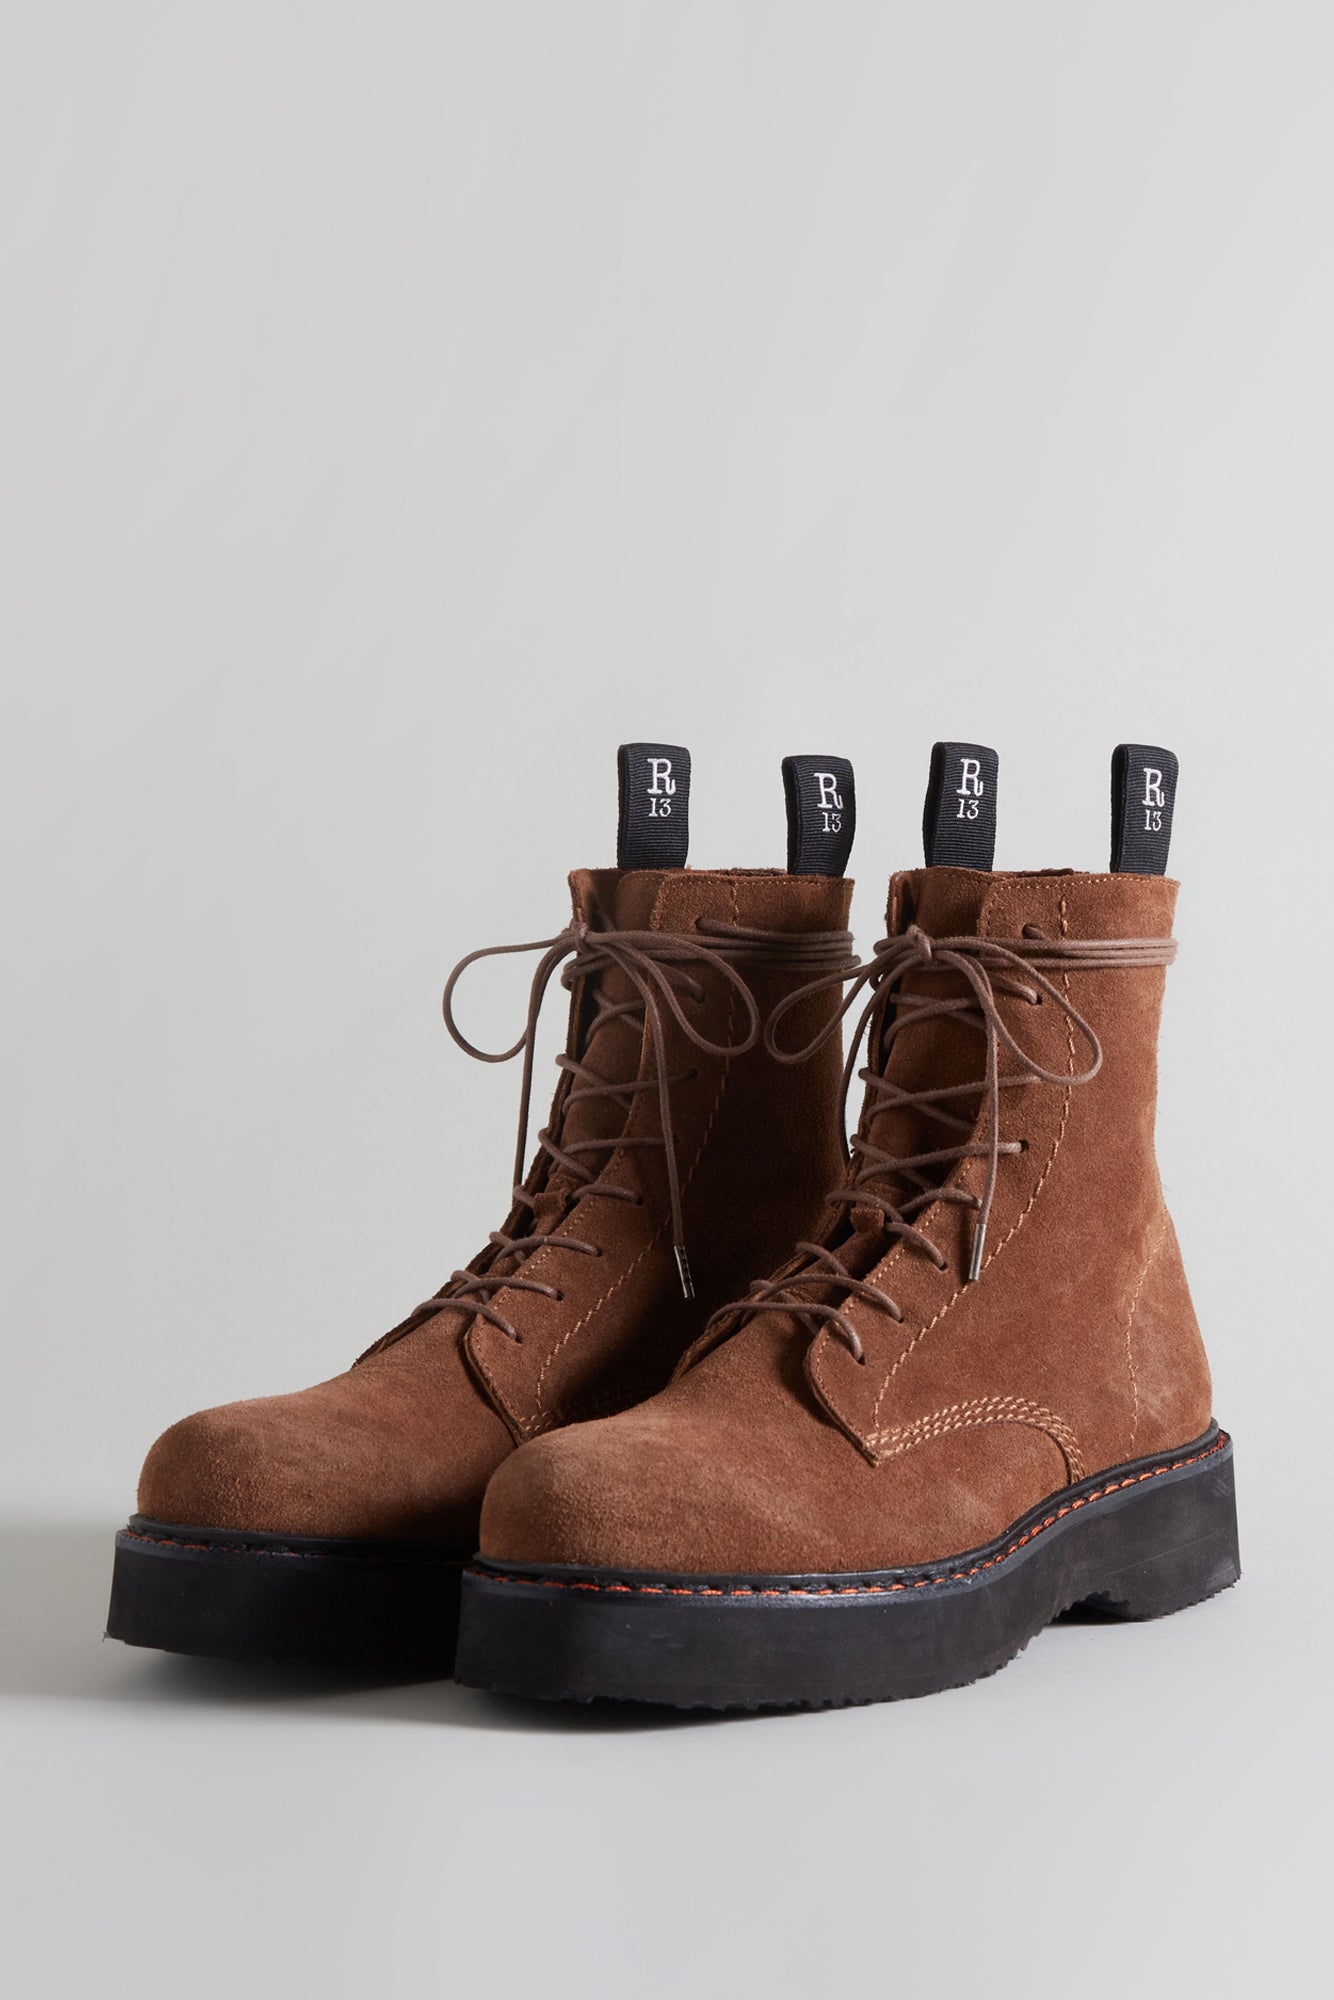 SINGLE STACK BOOT - BROWN SUEDE